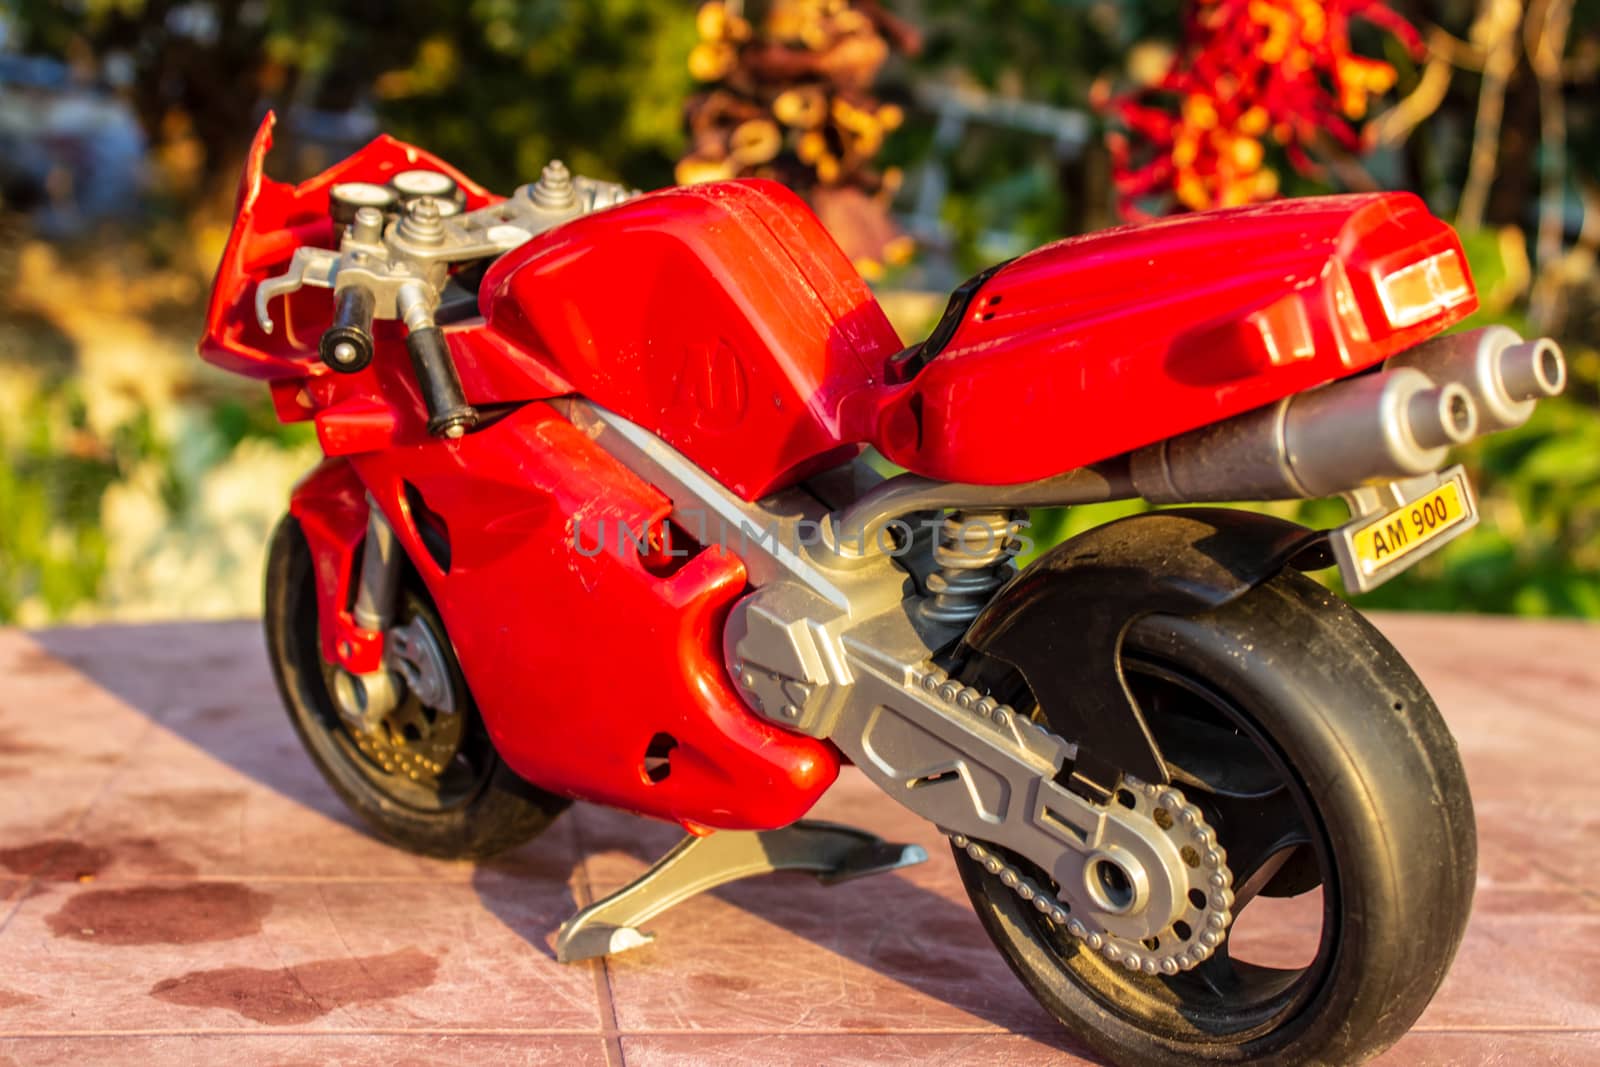 a isolated closeup red toy motorcycle with warm colors. photo has taken from a garden.